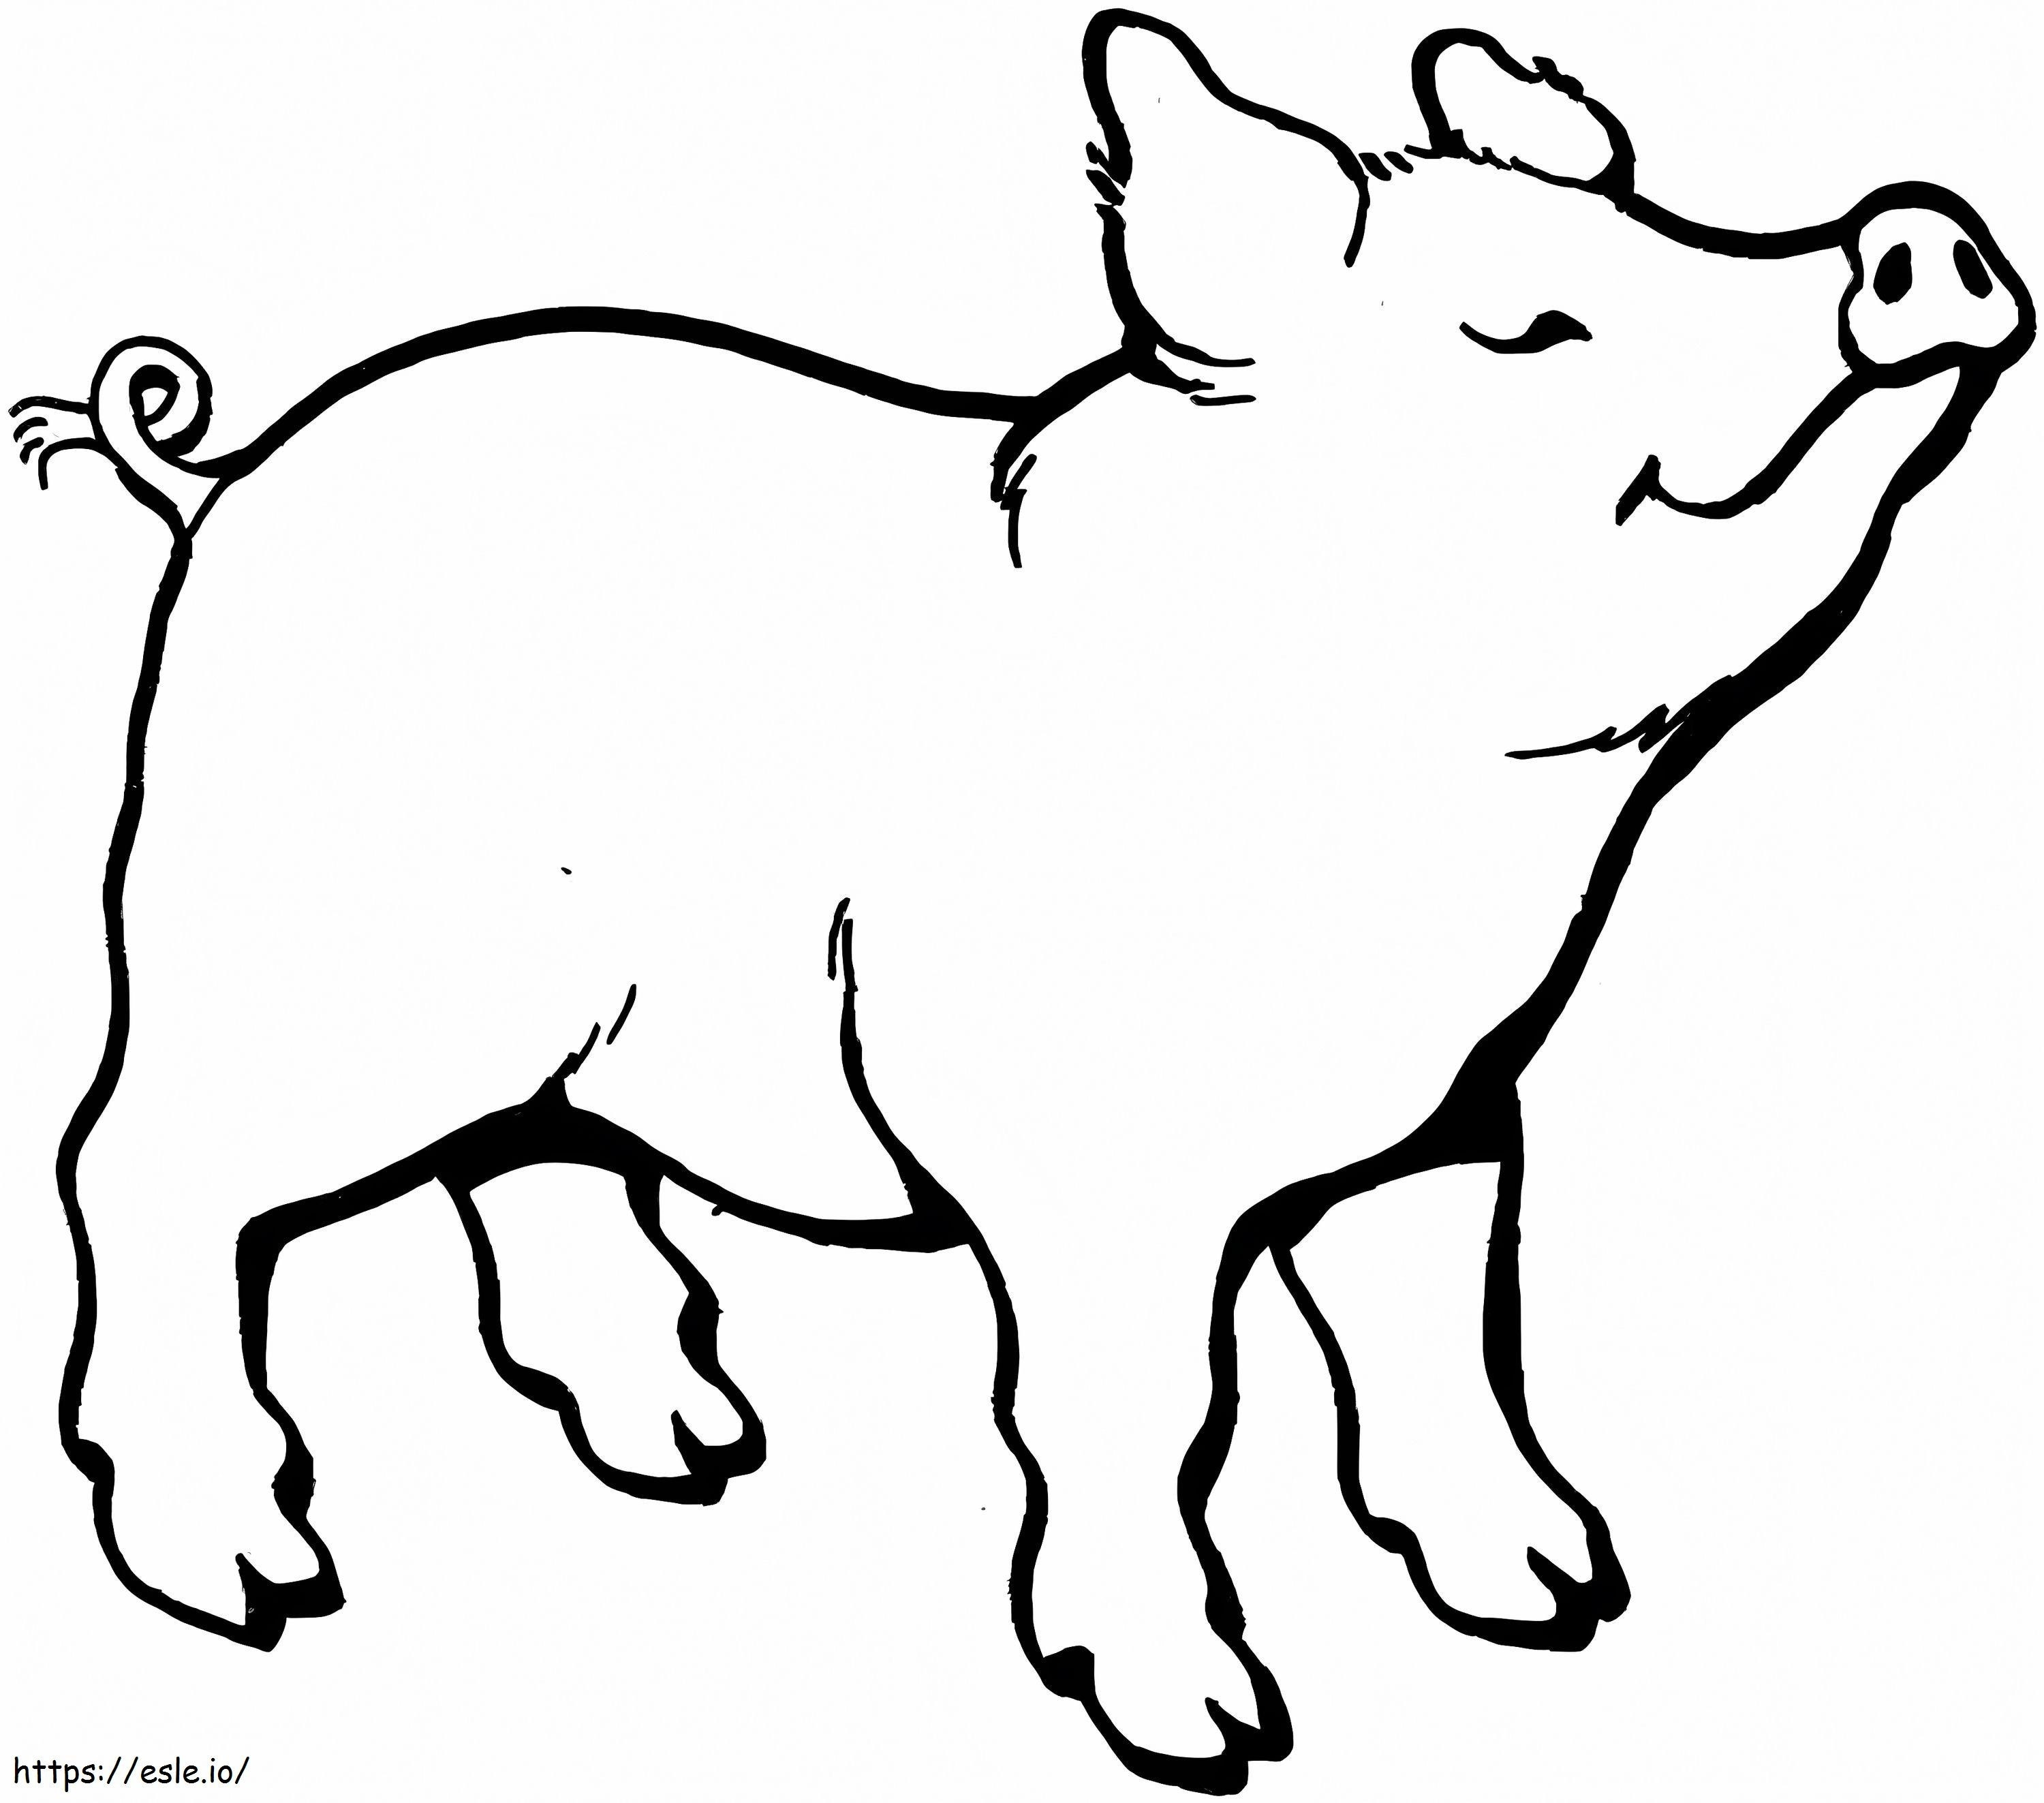 The Pig Smells Something coloring page